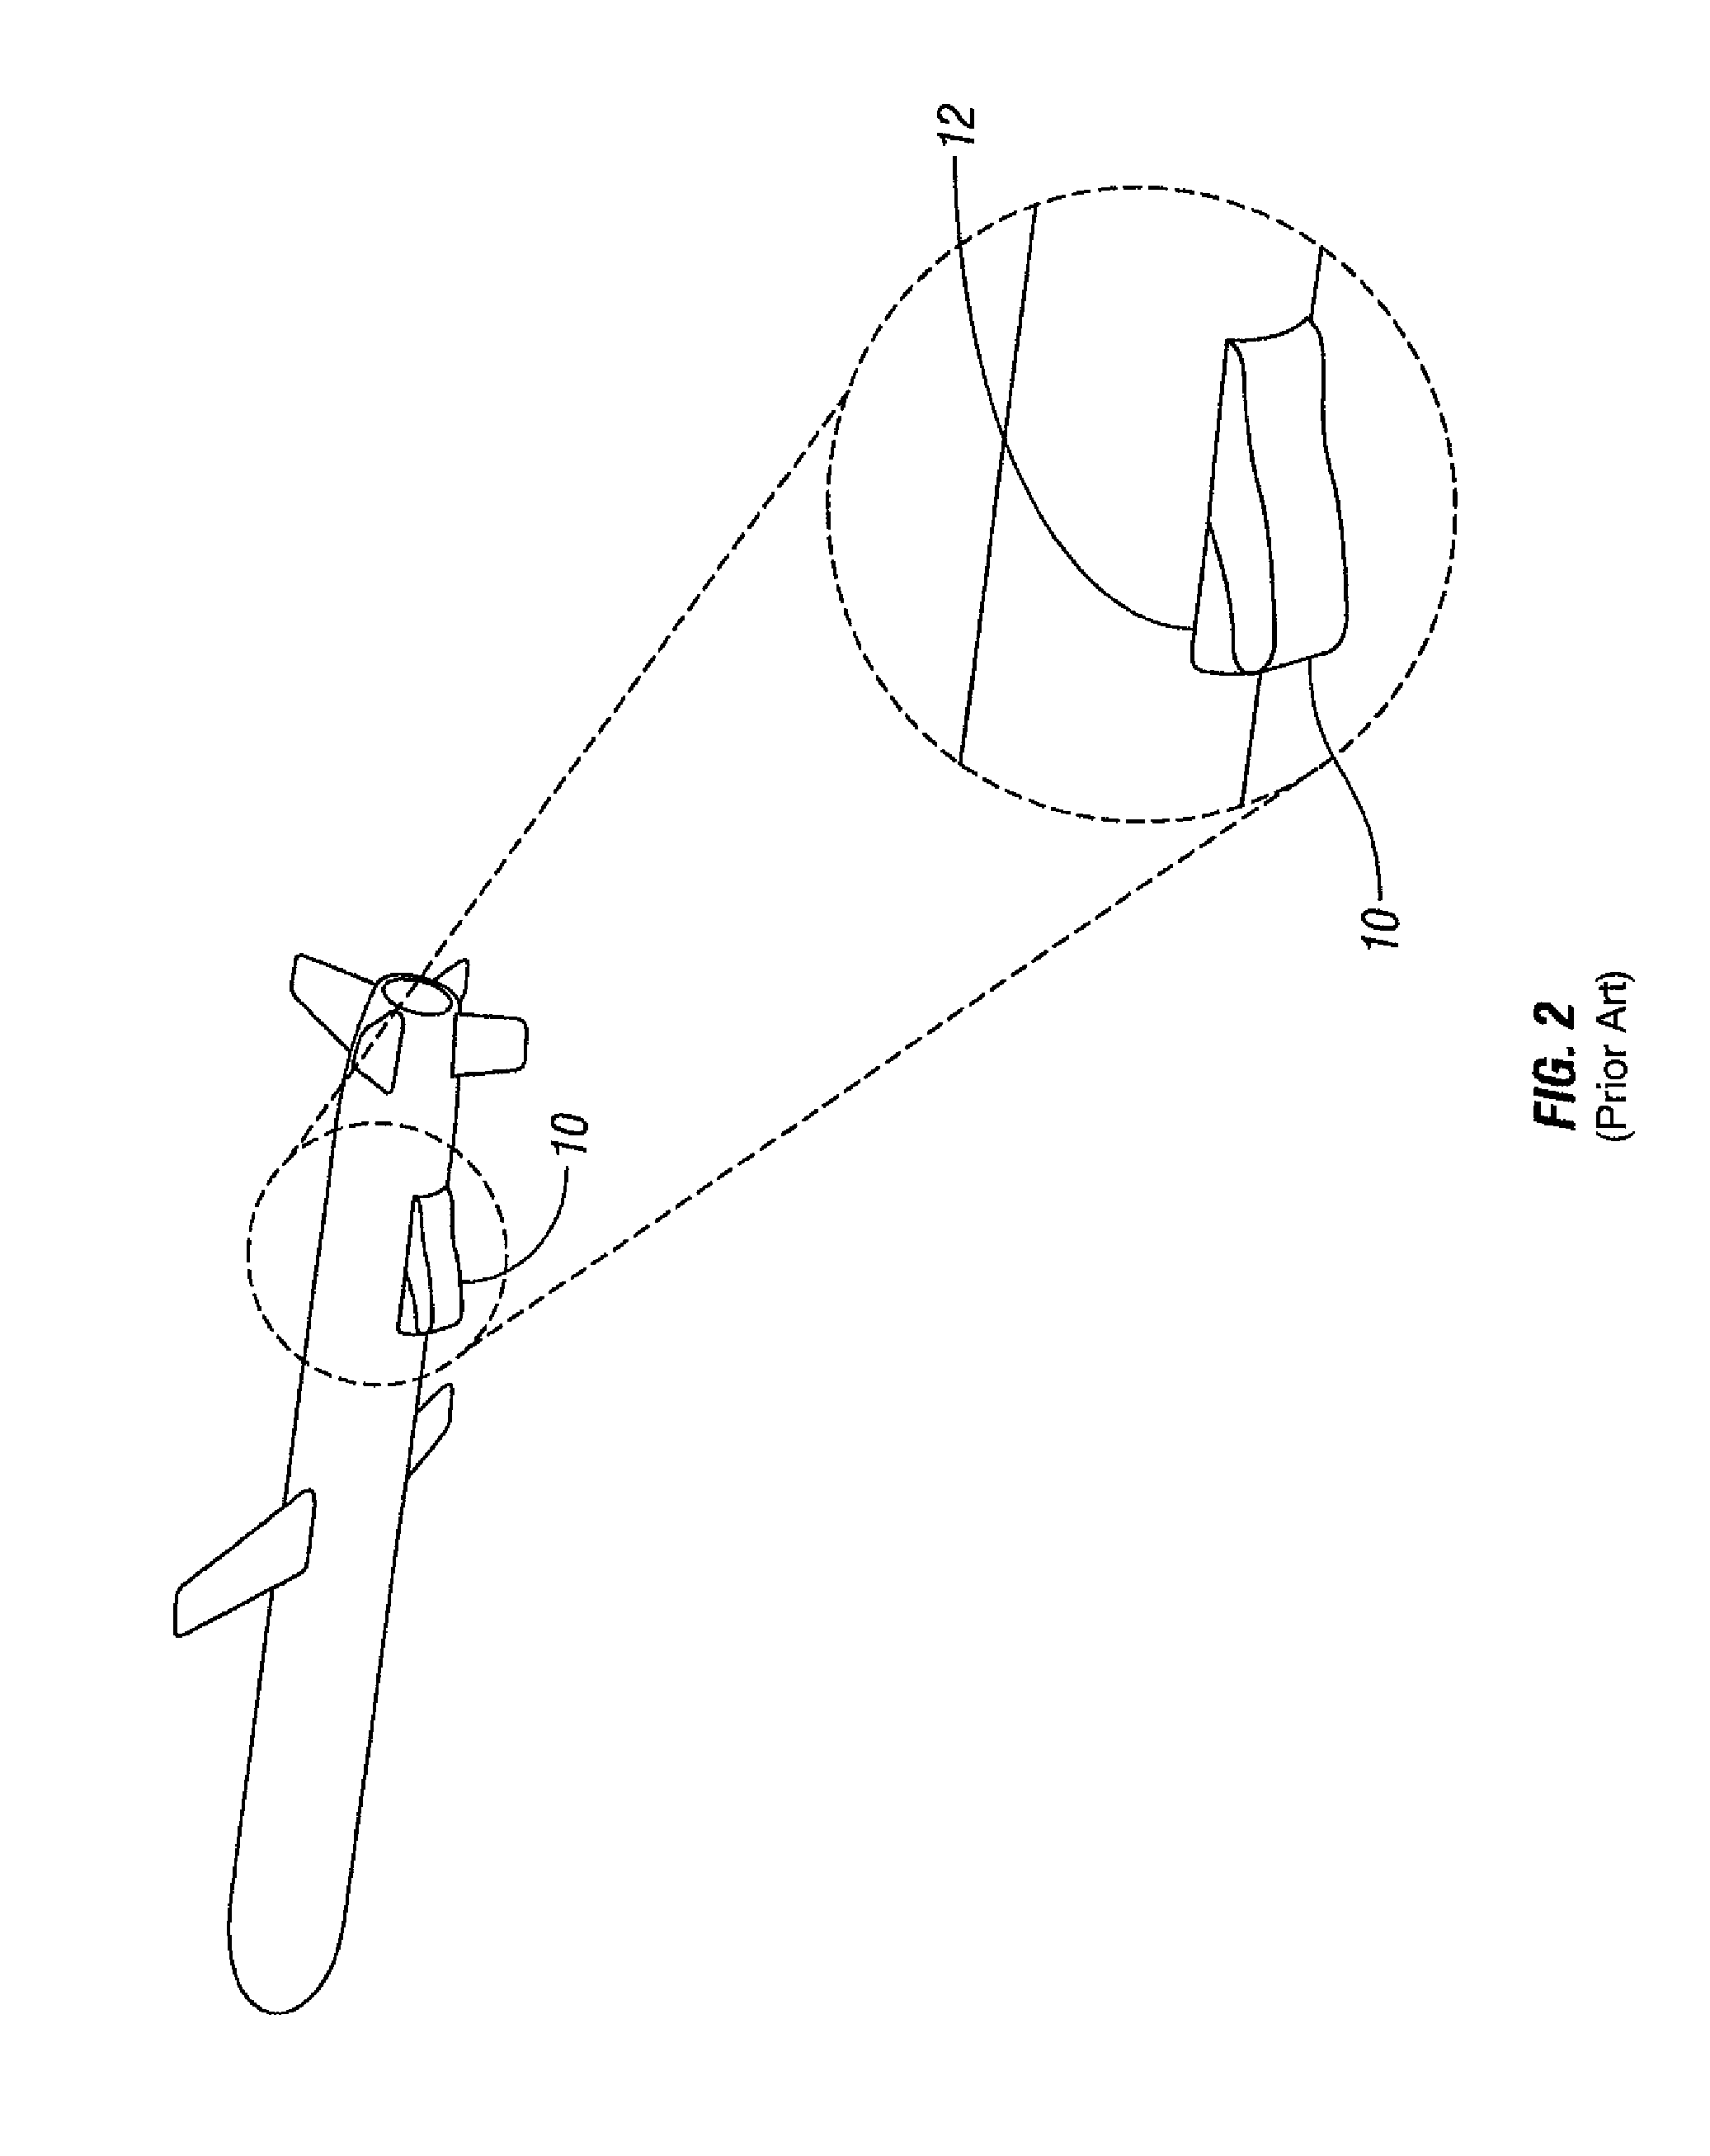 Hybrid (pitot-flush) air intake system for air-breathing missiles and aircraft